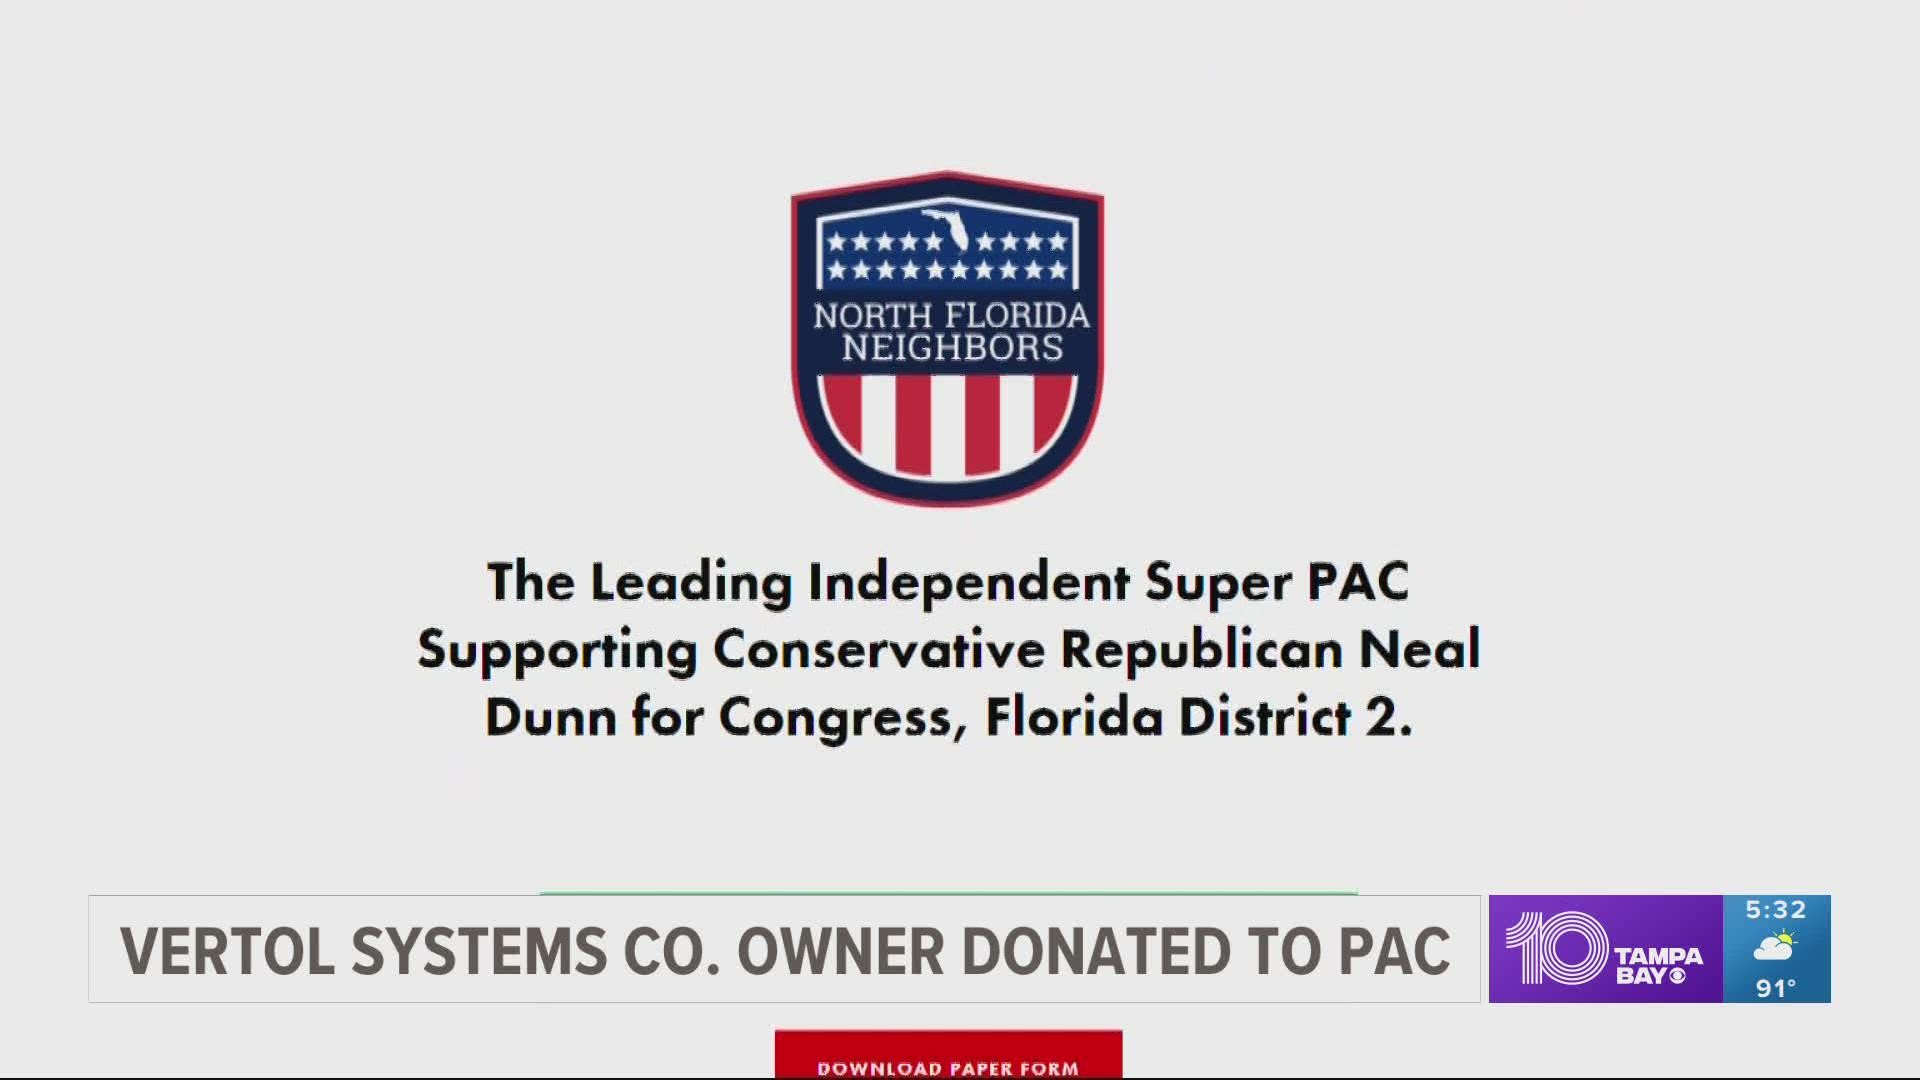 The owner of Vertol Systems Co. contributed thousands in personal and company funds to PAC's and campaigns supporting GOP candidates, according to OpenSecrets.org.